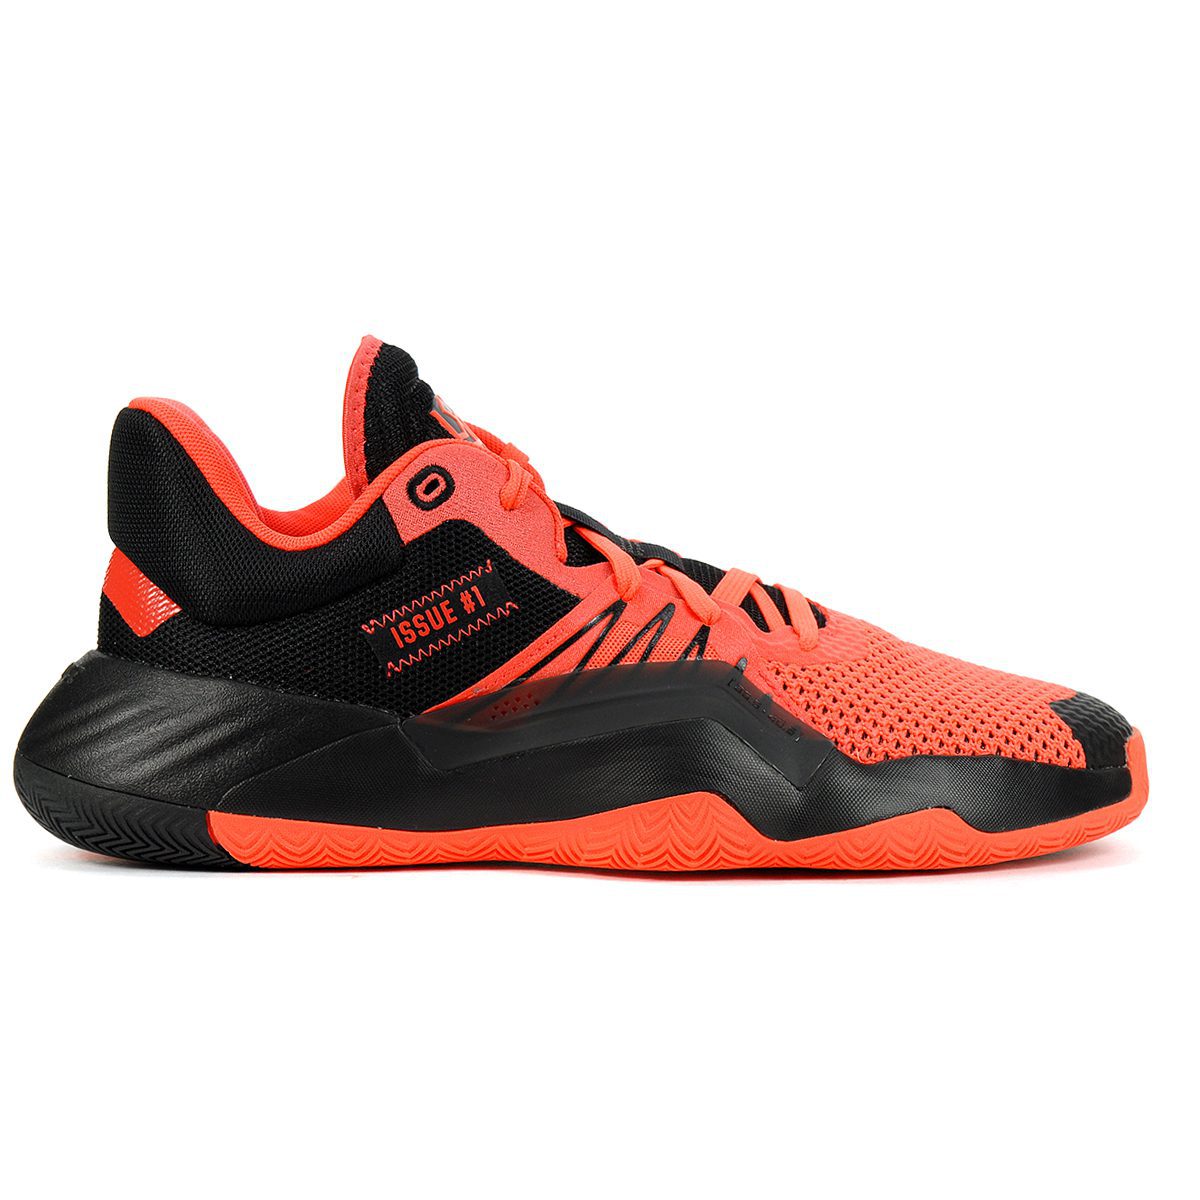 Adidas Men's D.O.N Issue #1 Core Black/Solar Red Basketball Shoes ...